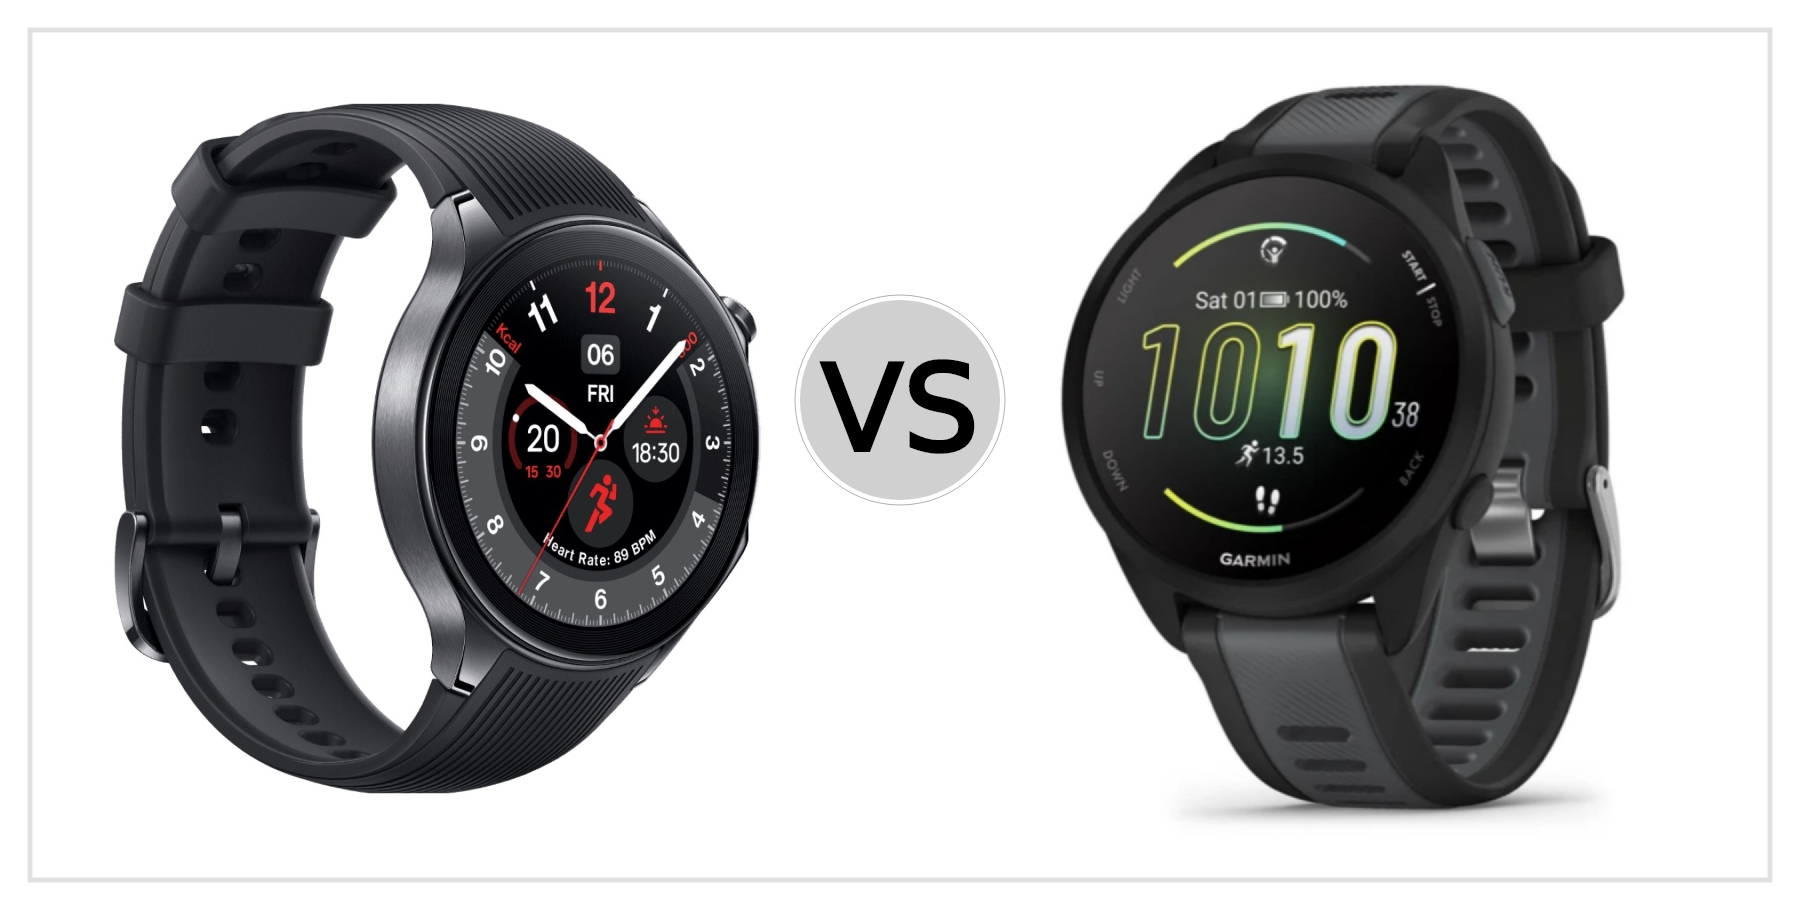 Compare OnePlus Watch 2 VS Garmin Forerunner 165 to see which is better